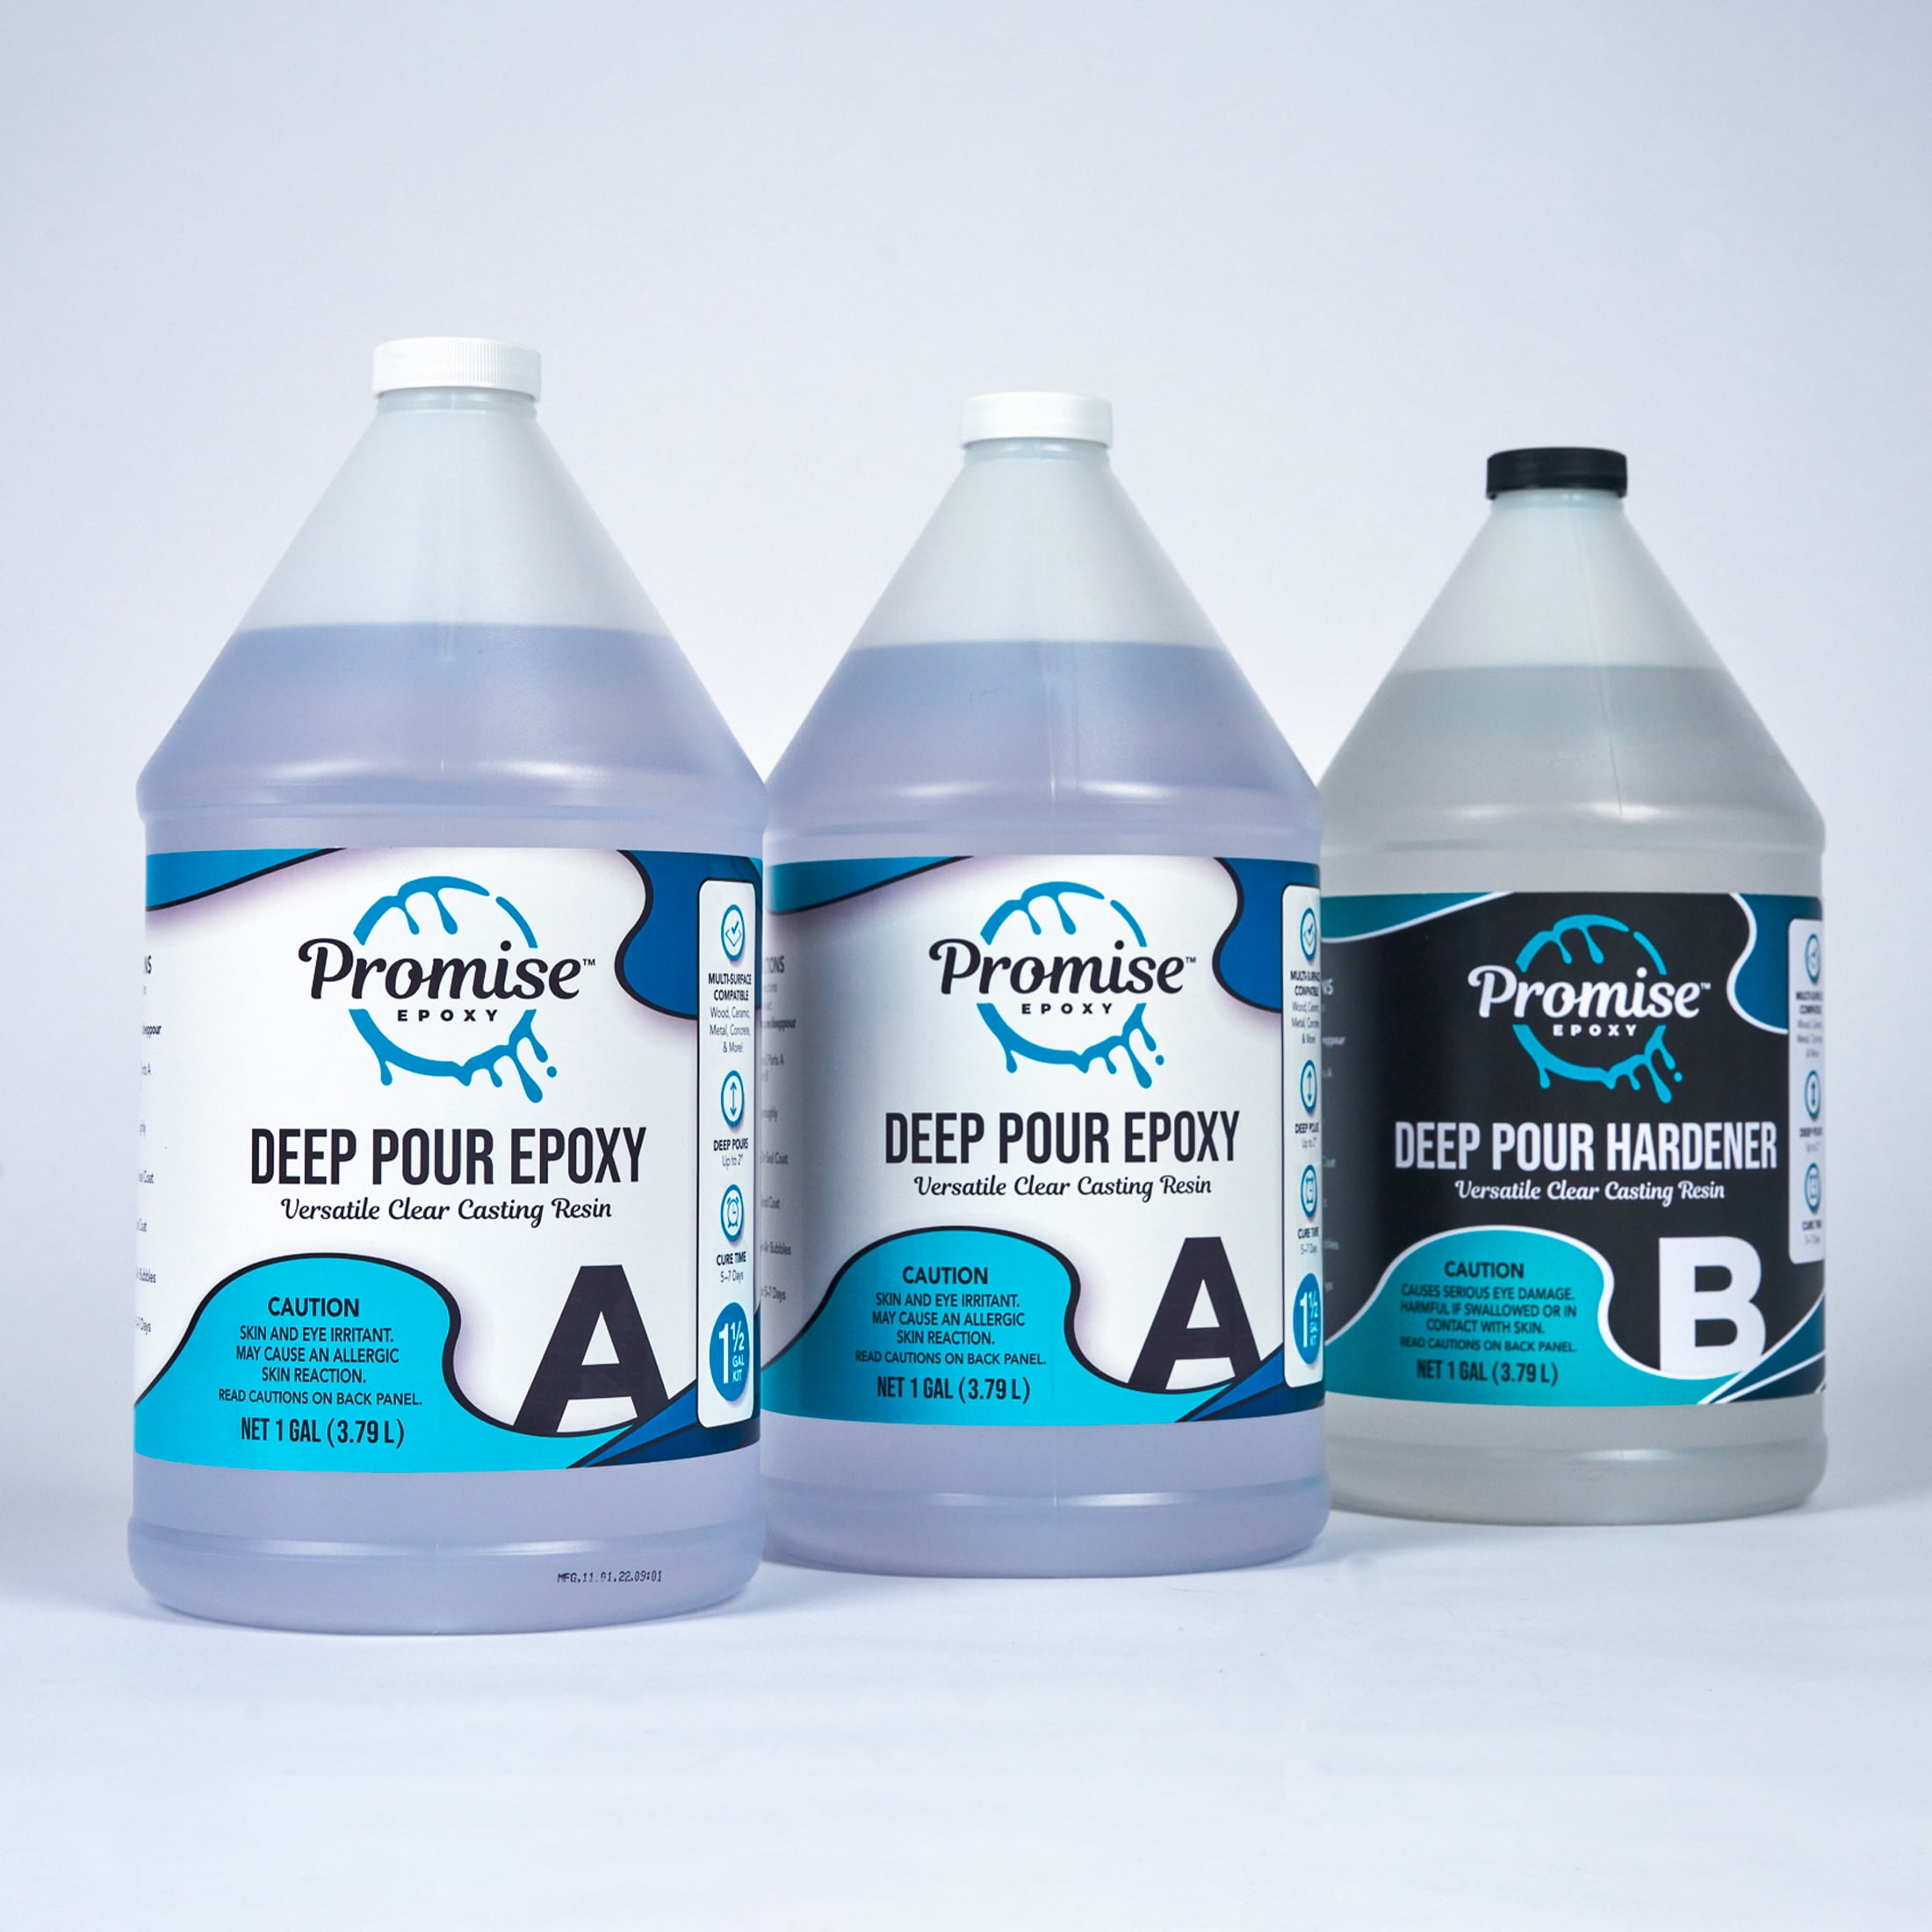 UltraClear Deep Pour Epoxy 3 Gallons